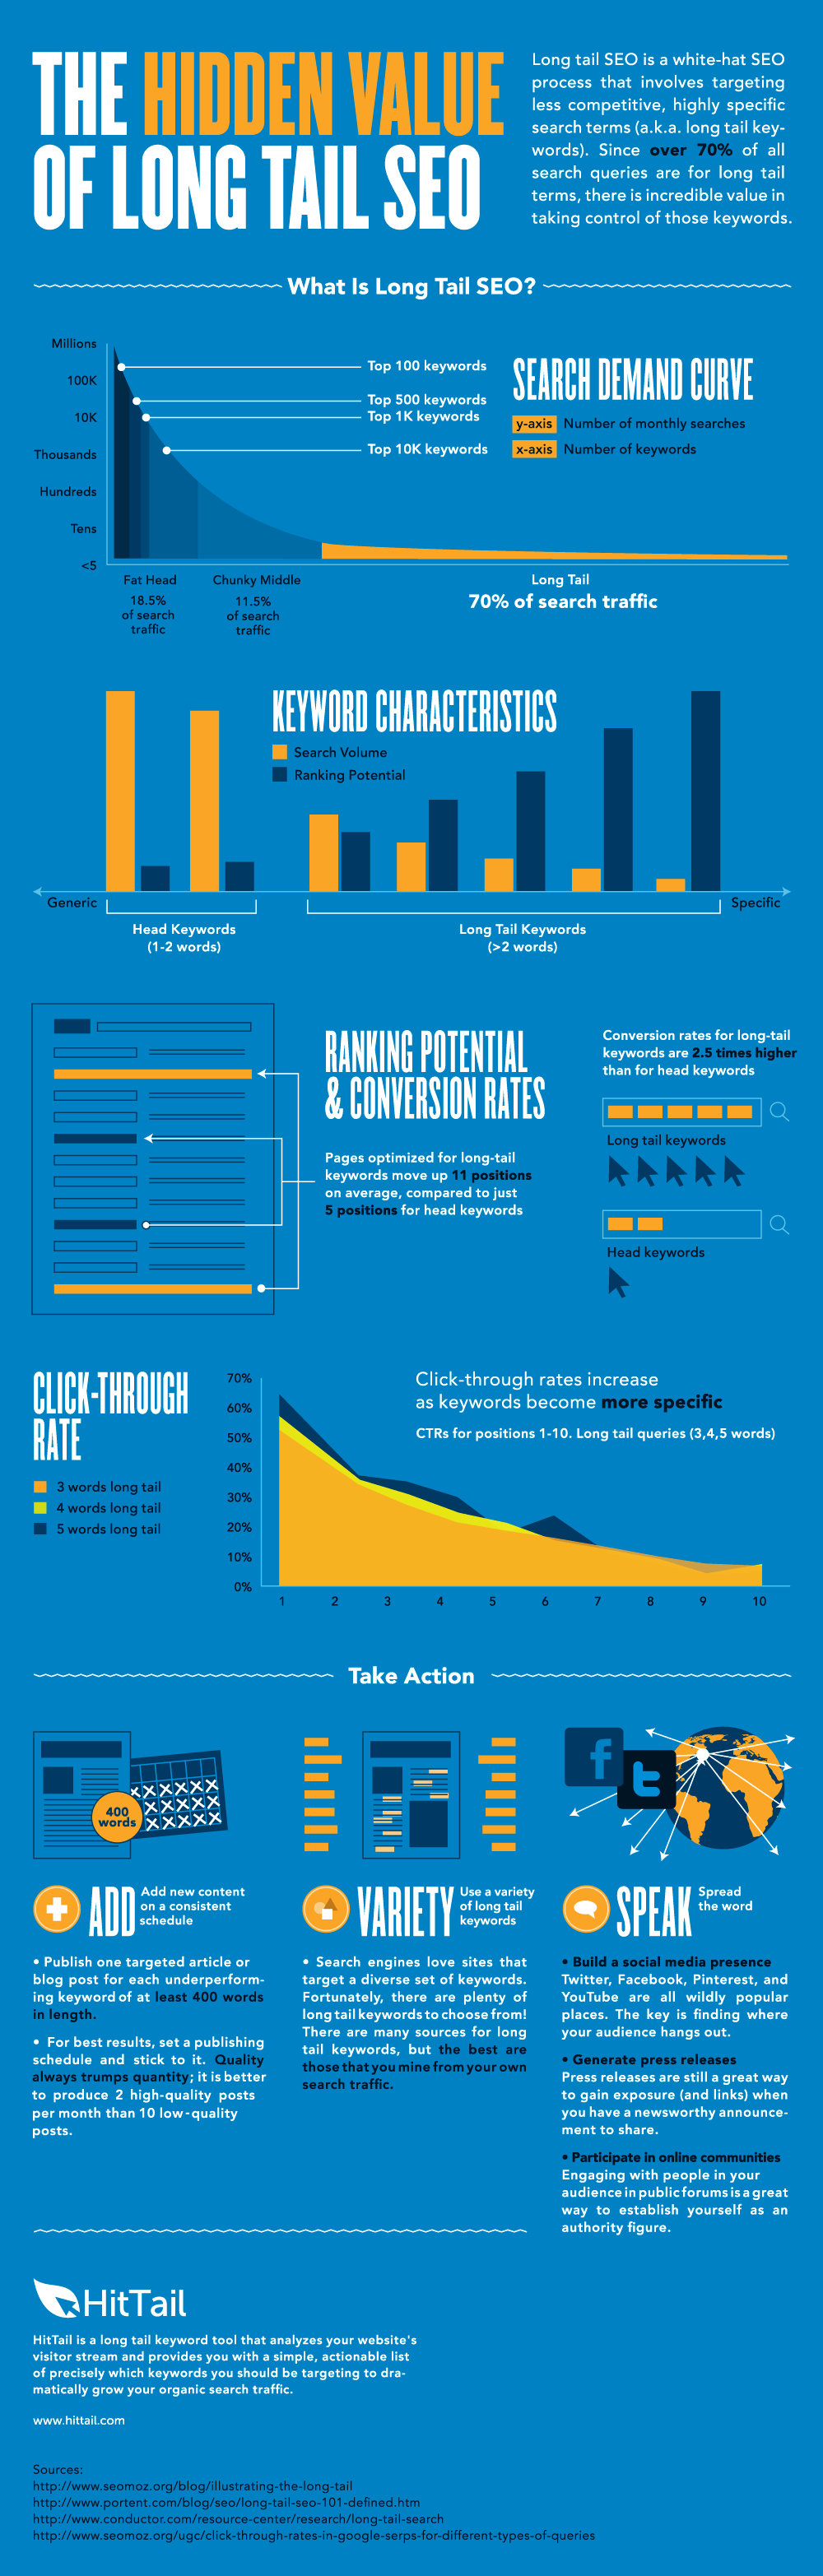 long-tail-seo-guide-infographic